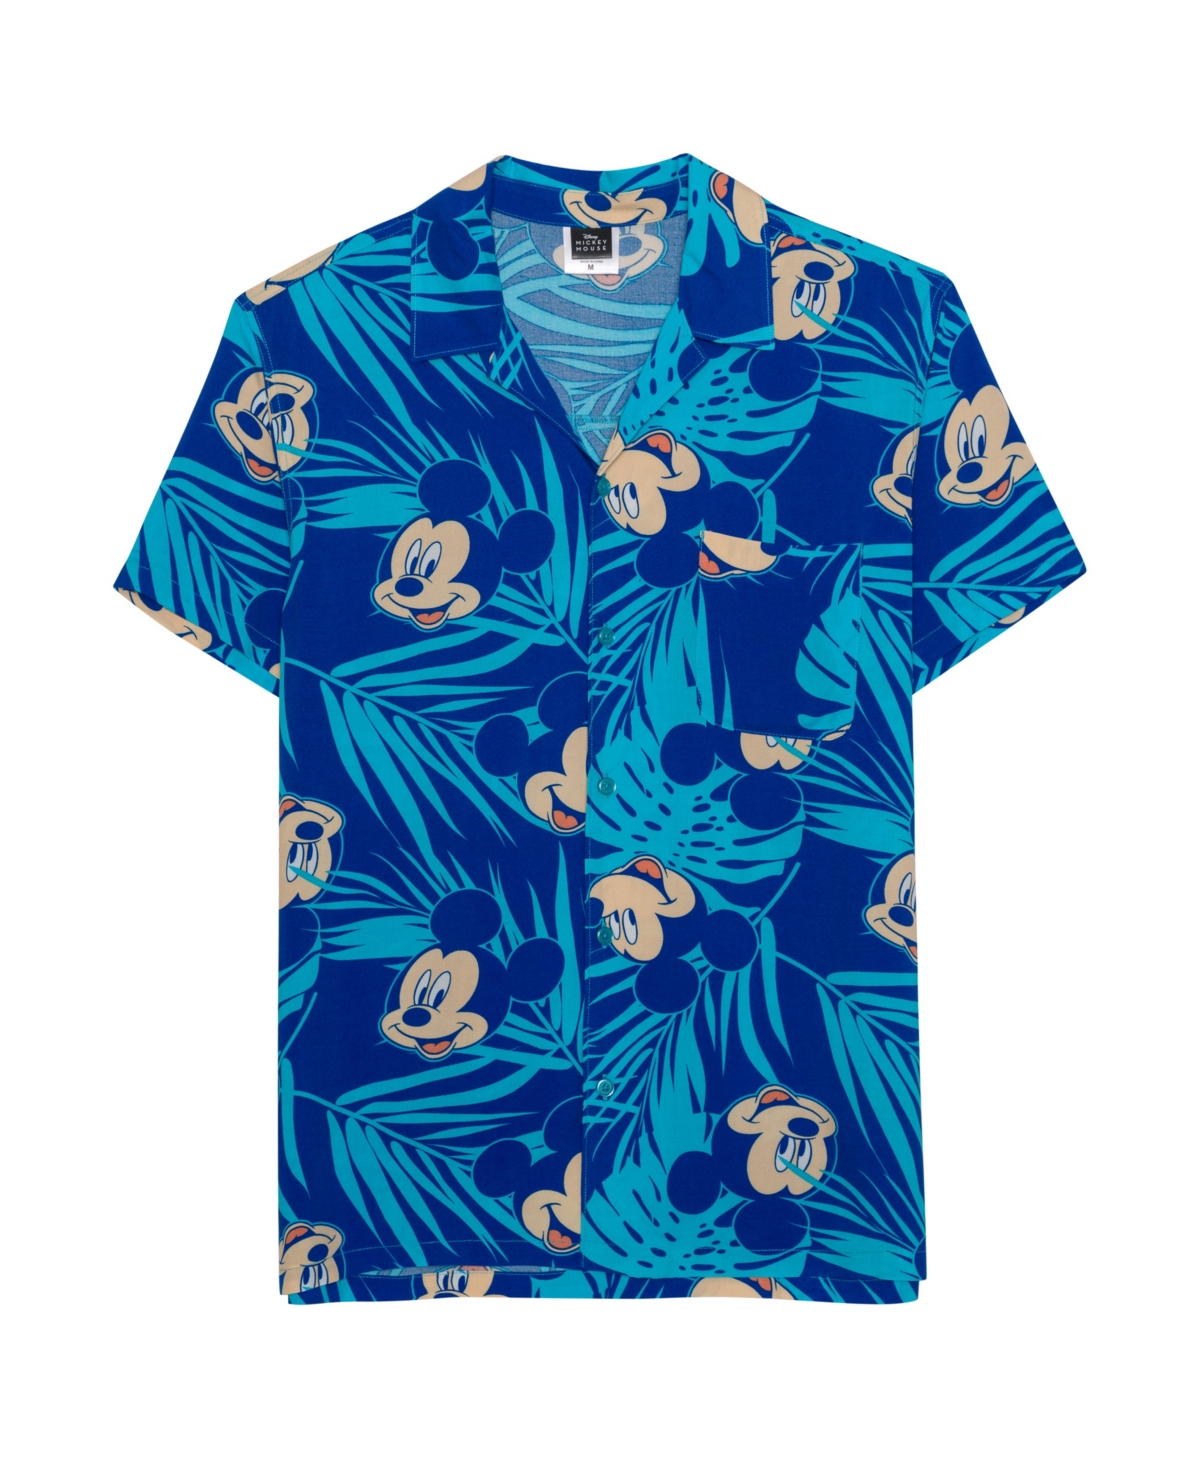 Men's Mickey Mouse Short Sleeves Woven Shirt - Blue